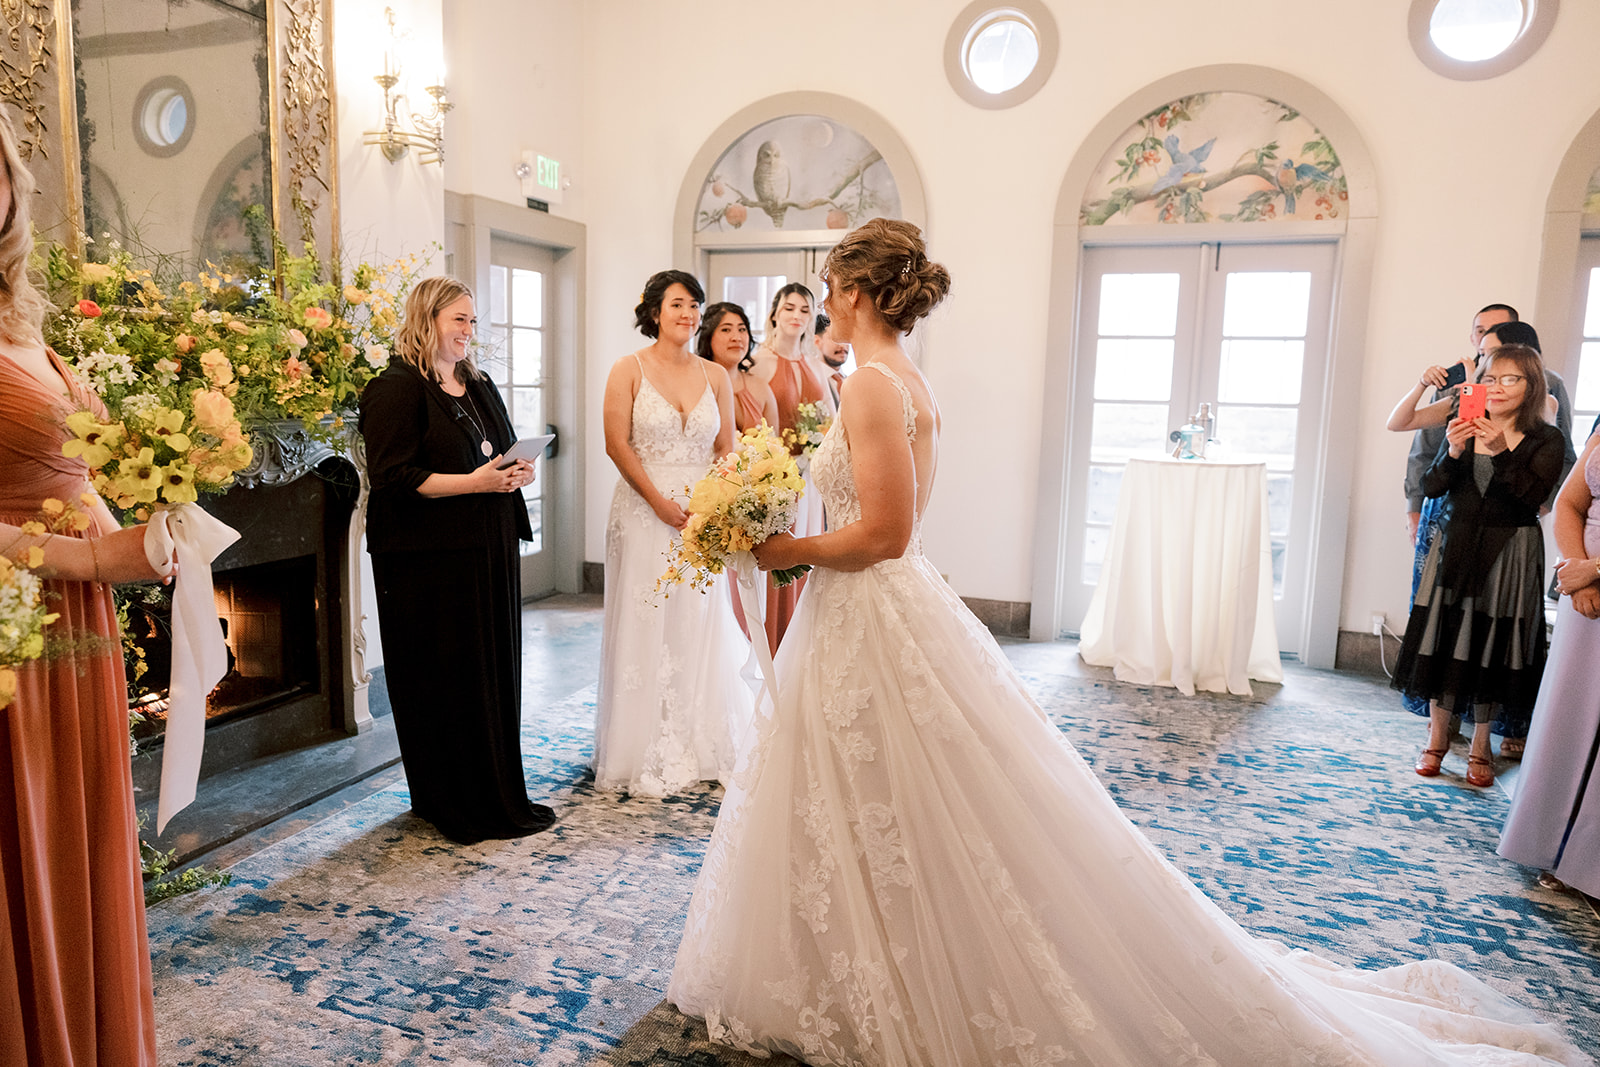 one brides stands at the alter while another bride walks up the aisle during the ceremony